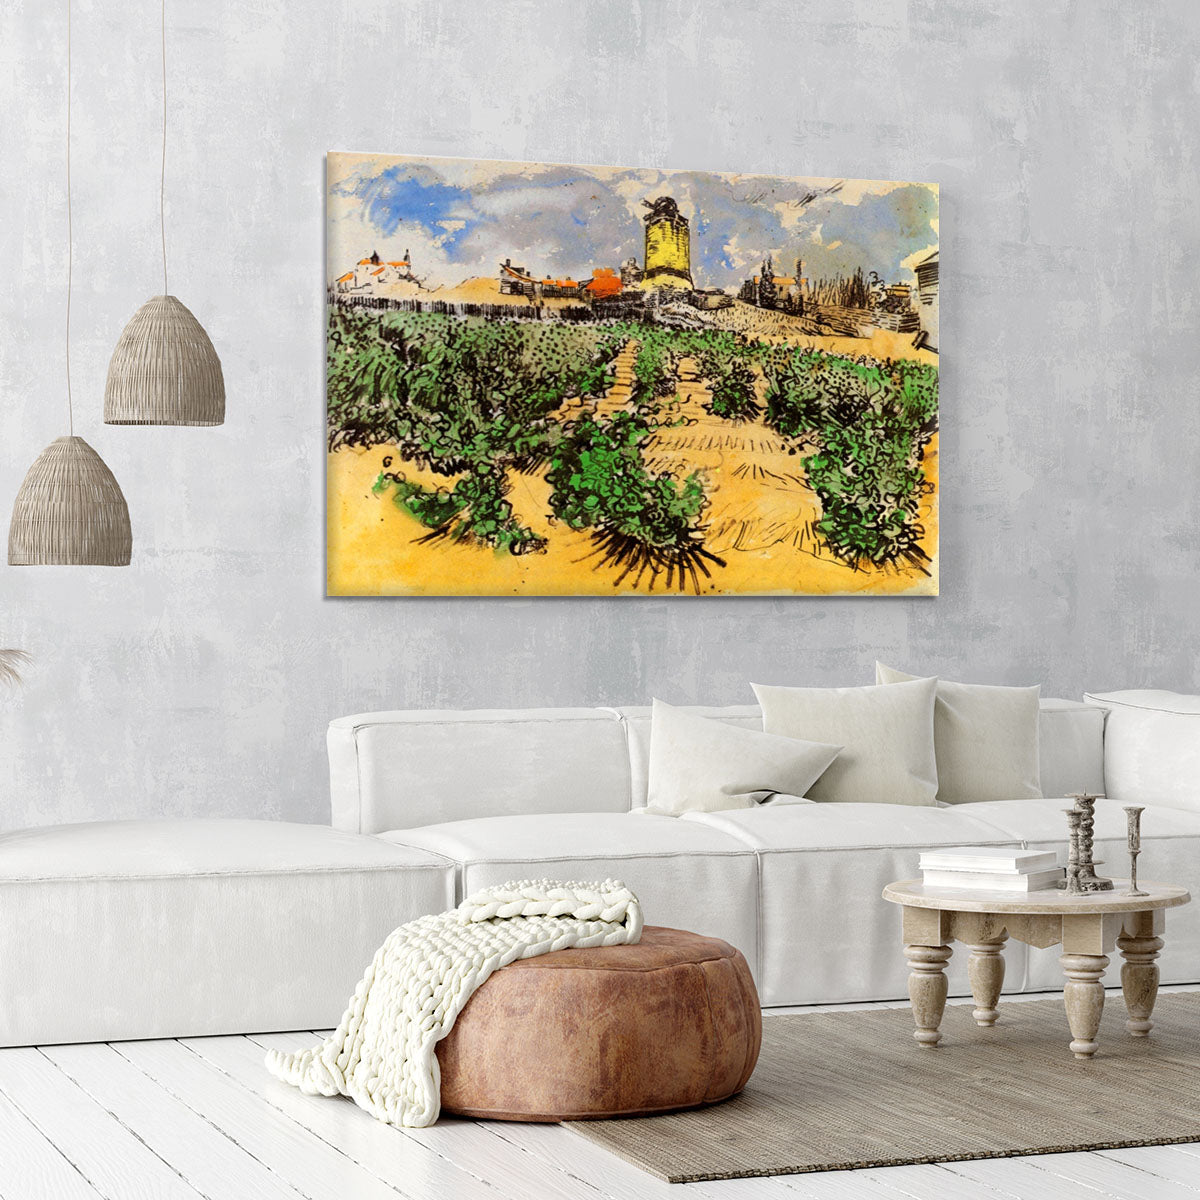 The Mill of Alphonse Daudet at Fontevielle by Van Gogh Canvas